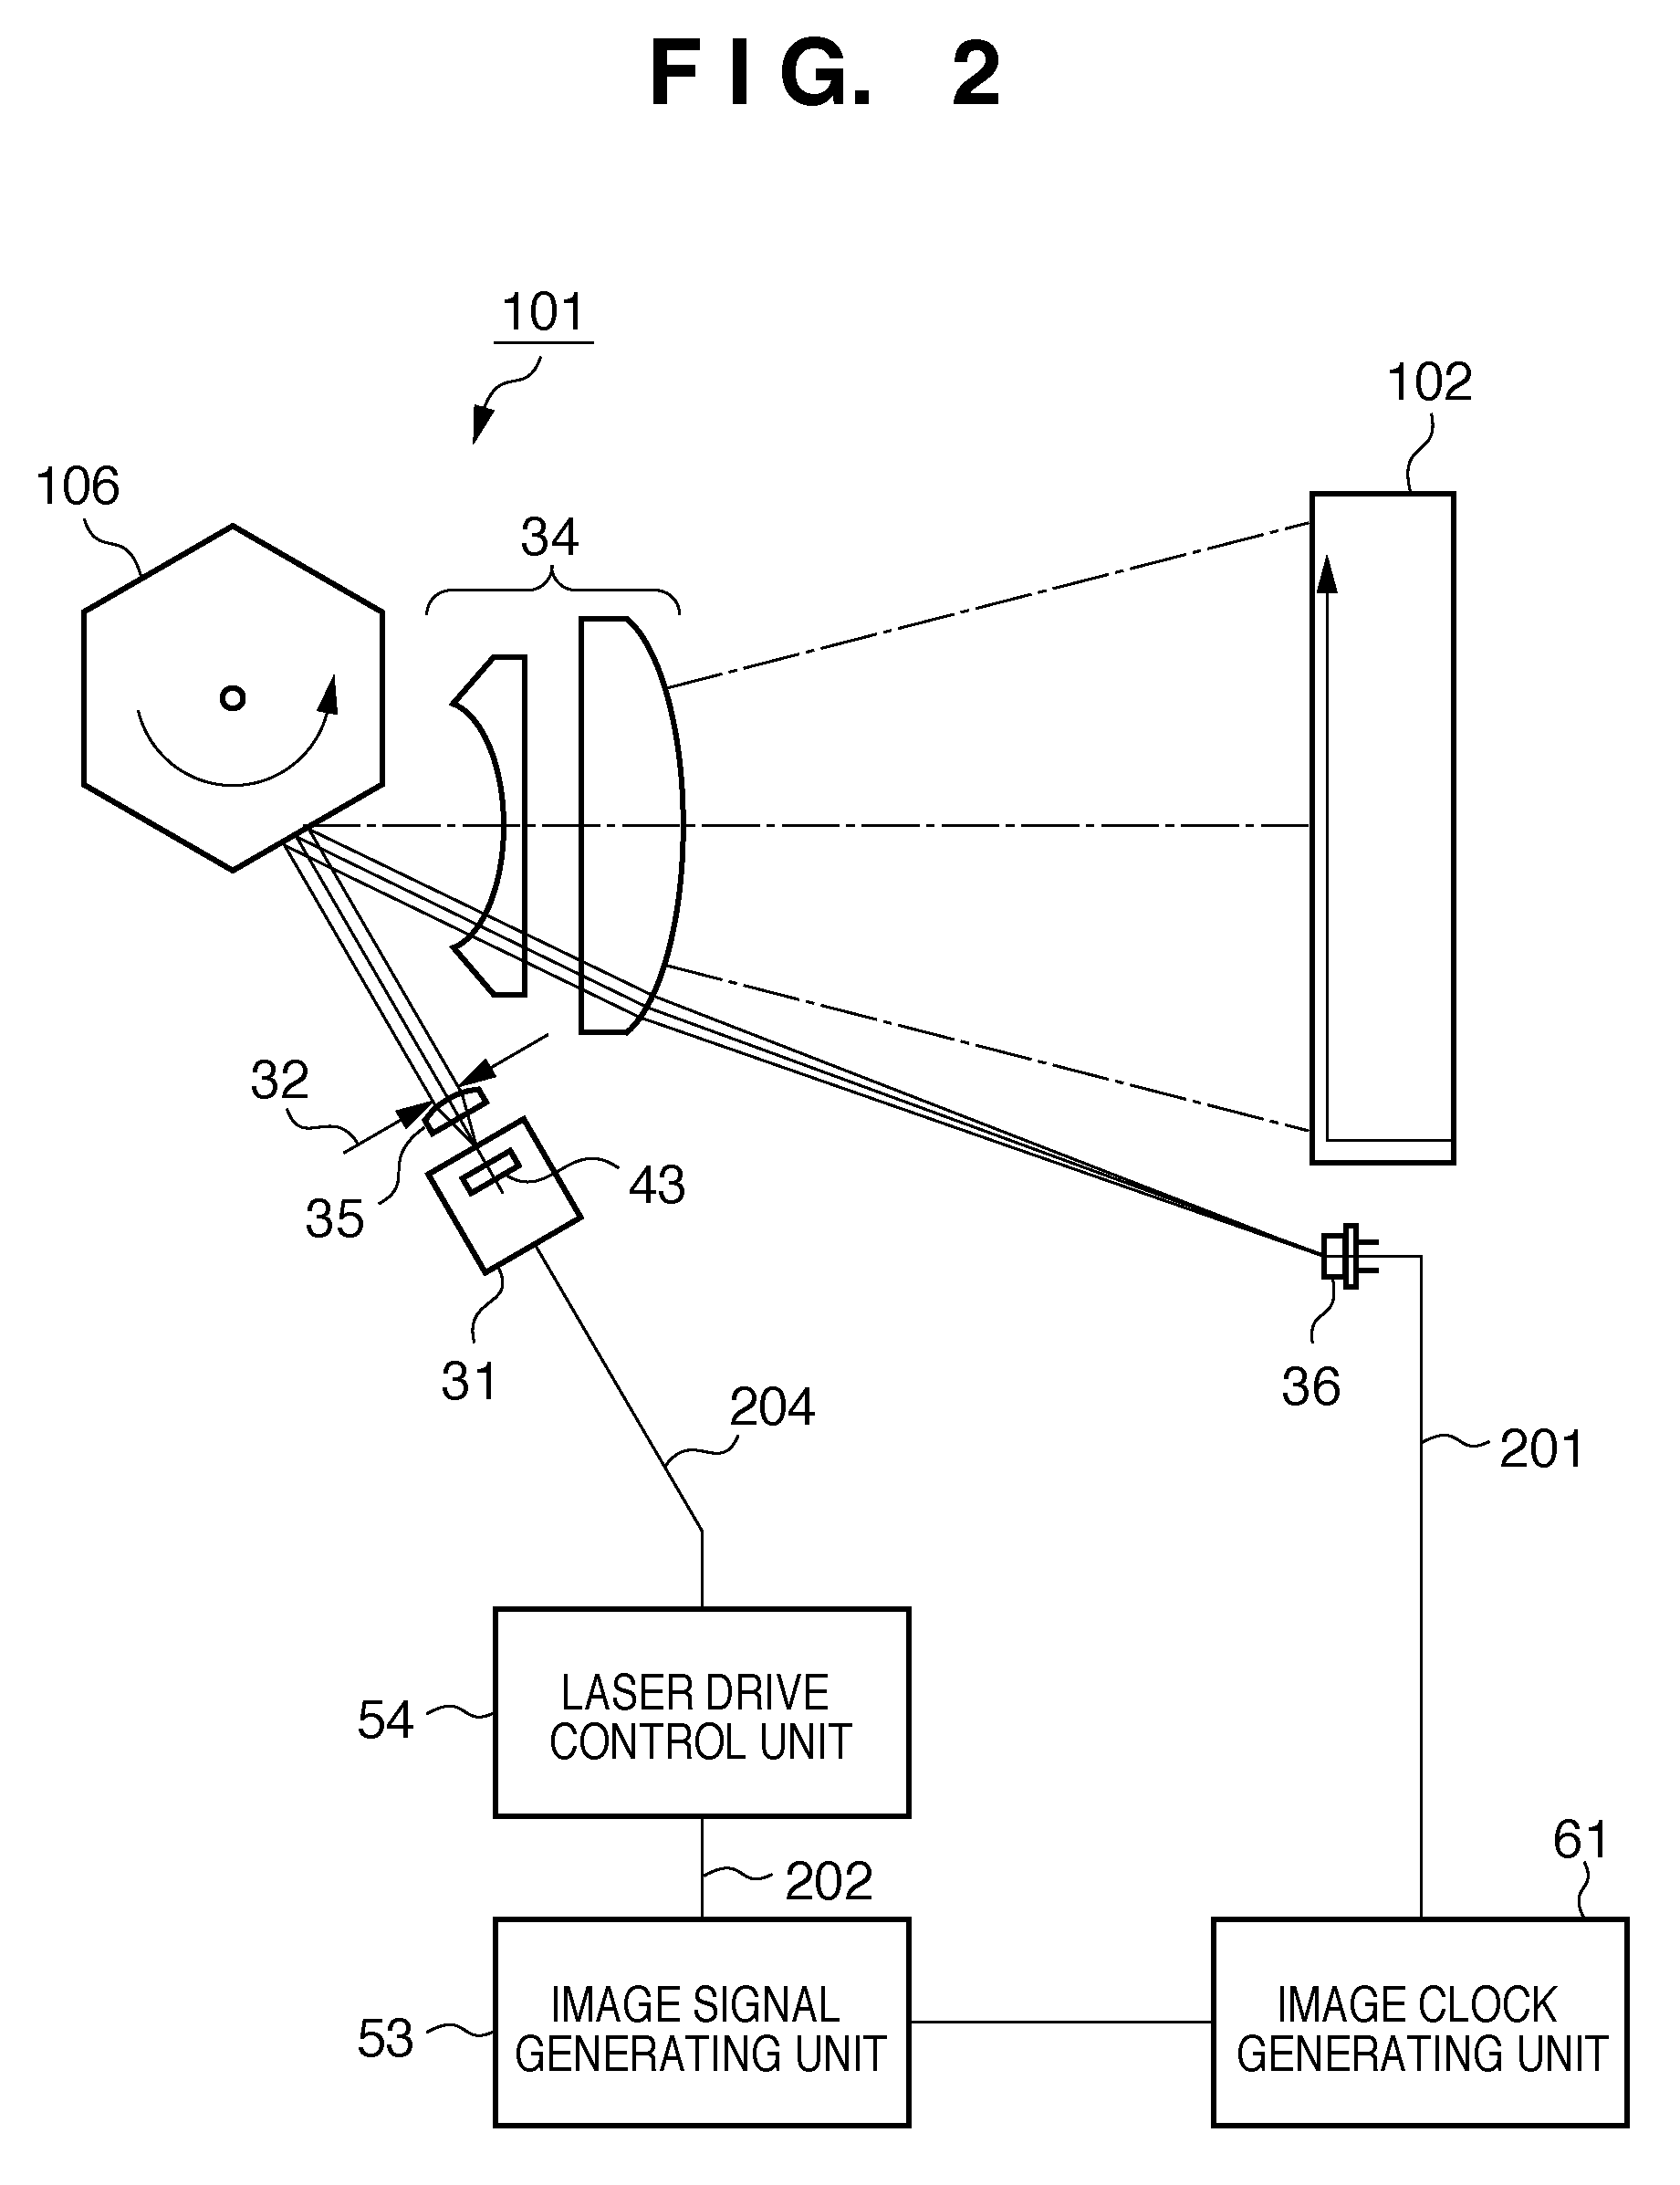 Image forming apparatus, scanning optical apparatus, and control methods thereof